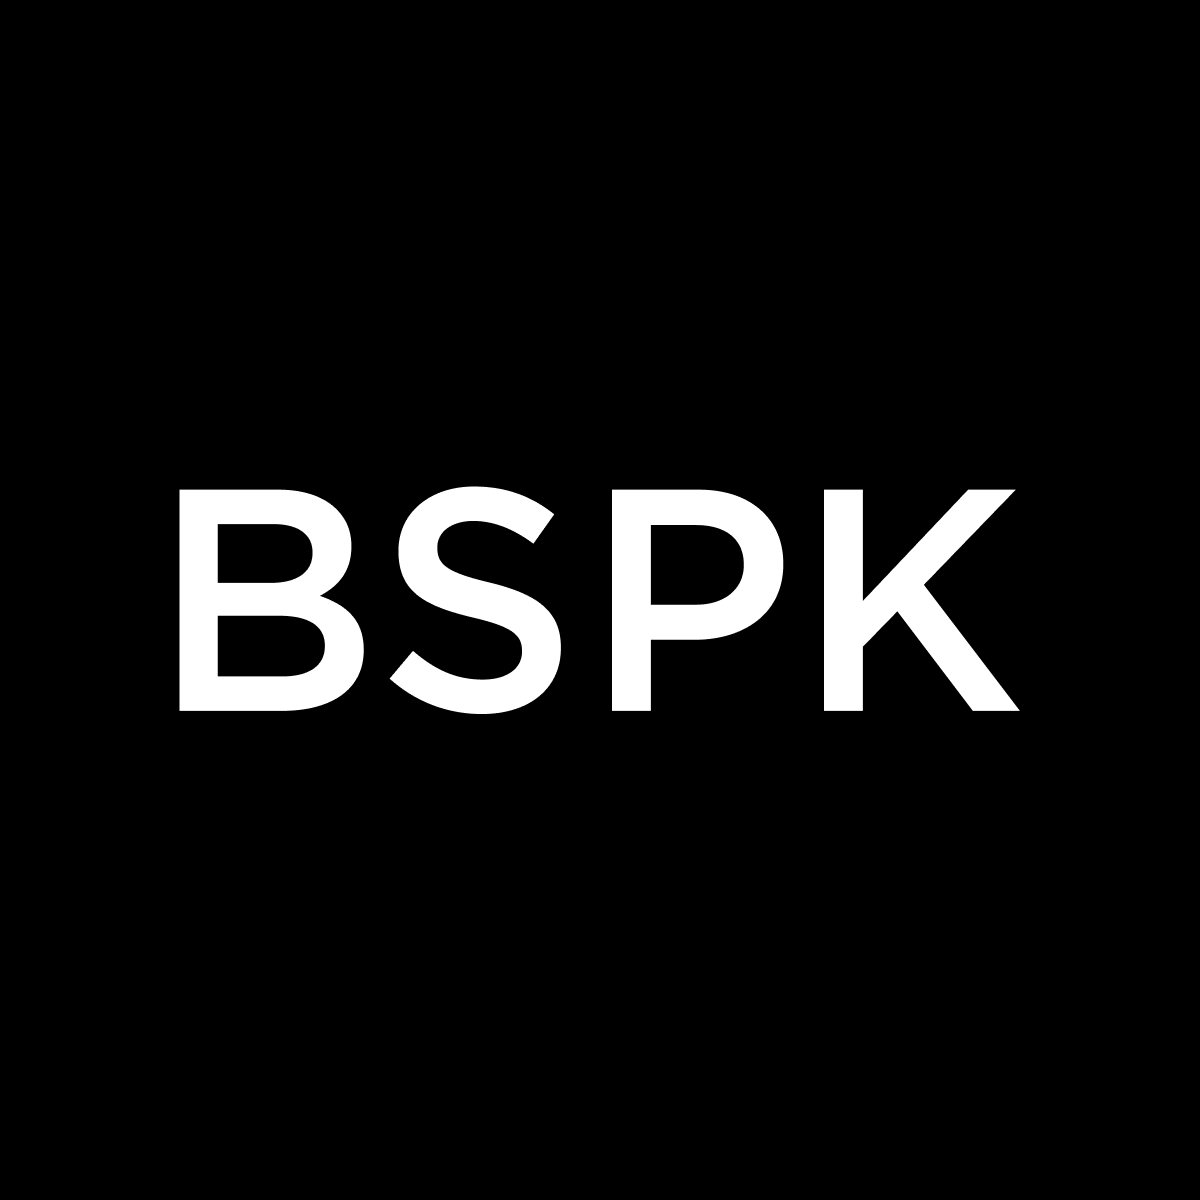 BSPK Clienteling and CRM Shopify App